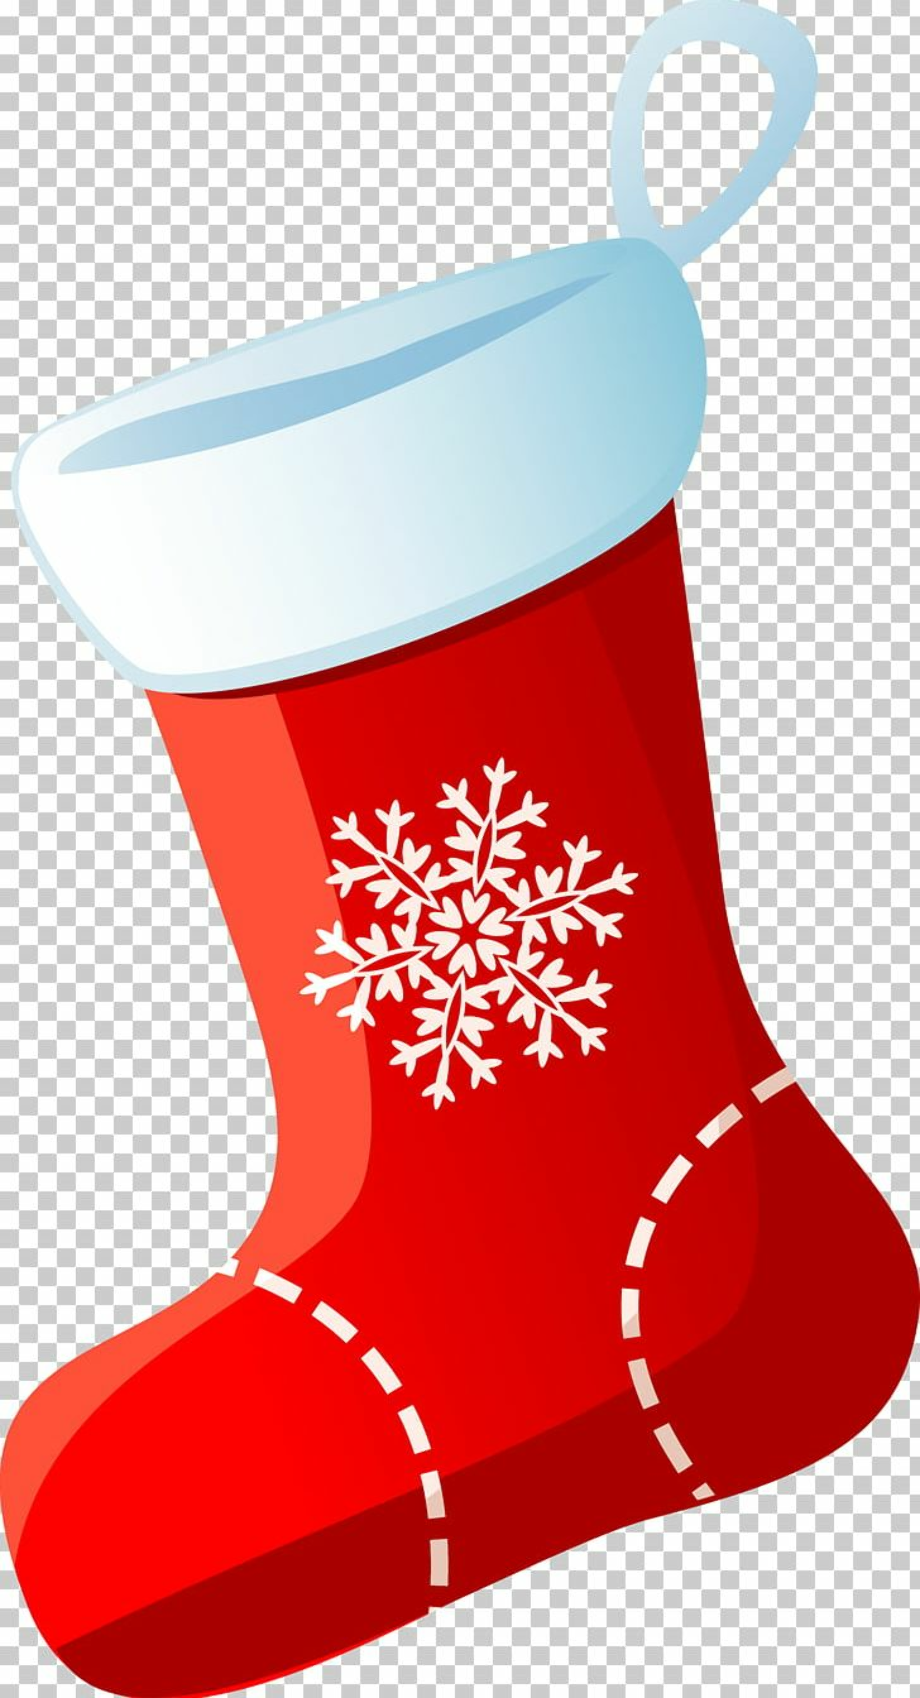 Download High Quality sock clipart christmas Transparent PNG Images ...